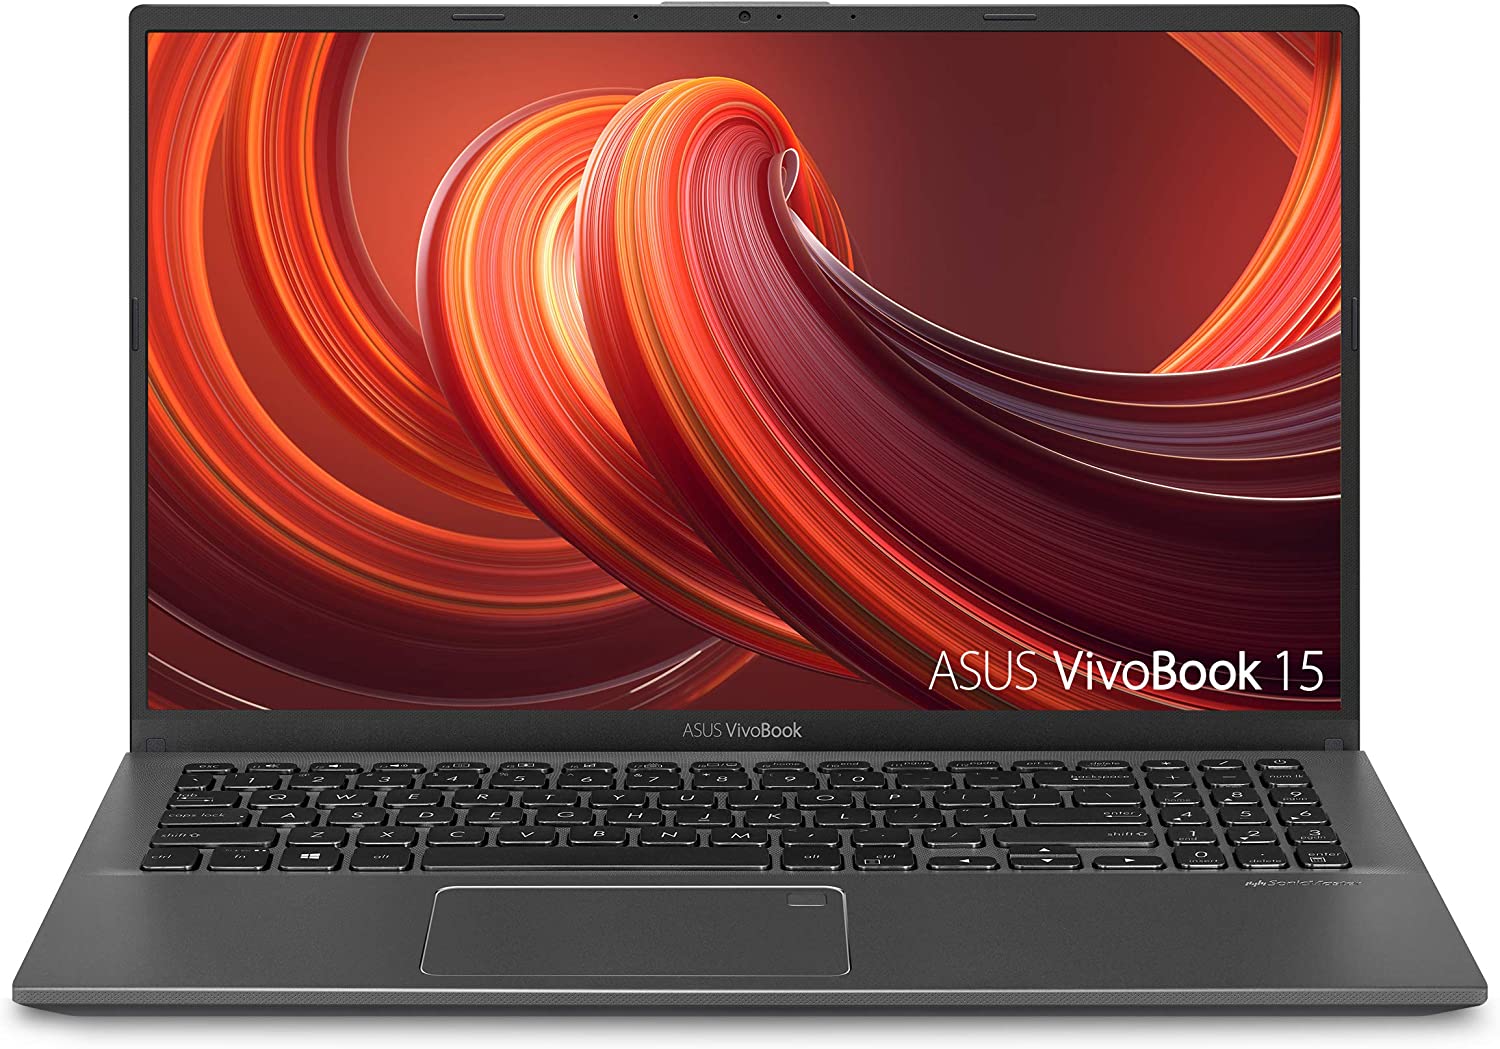 ASUS VivoBook 15 Thin and Light Laptop, 15.6” FHD [...]